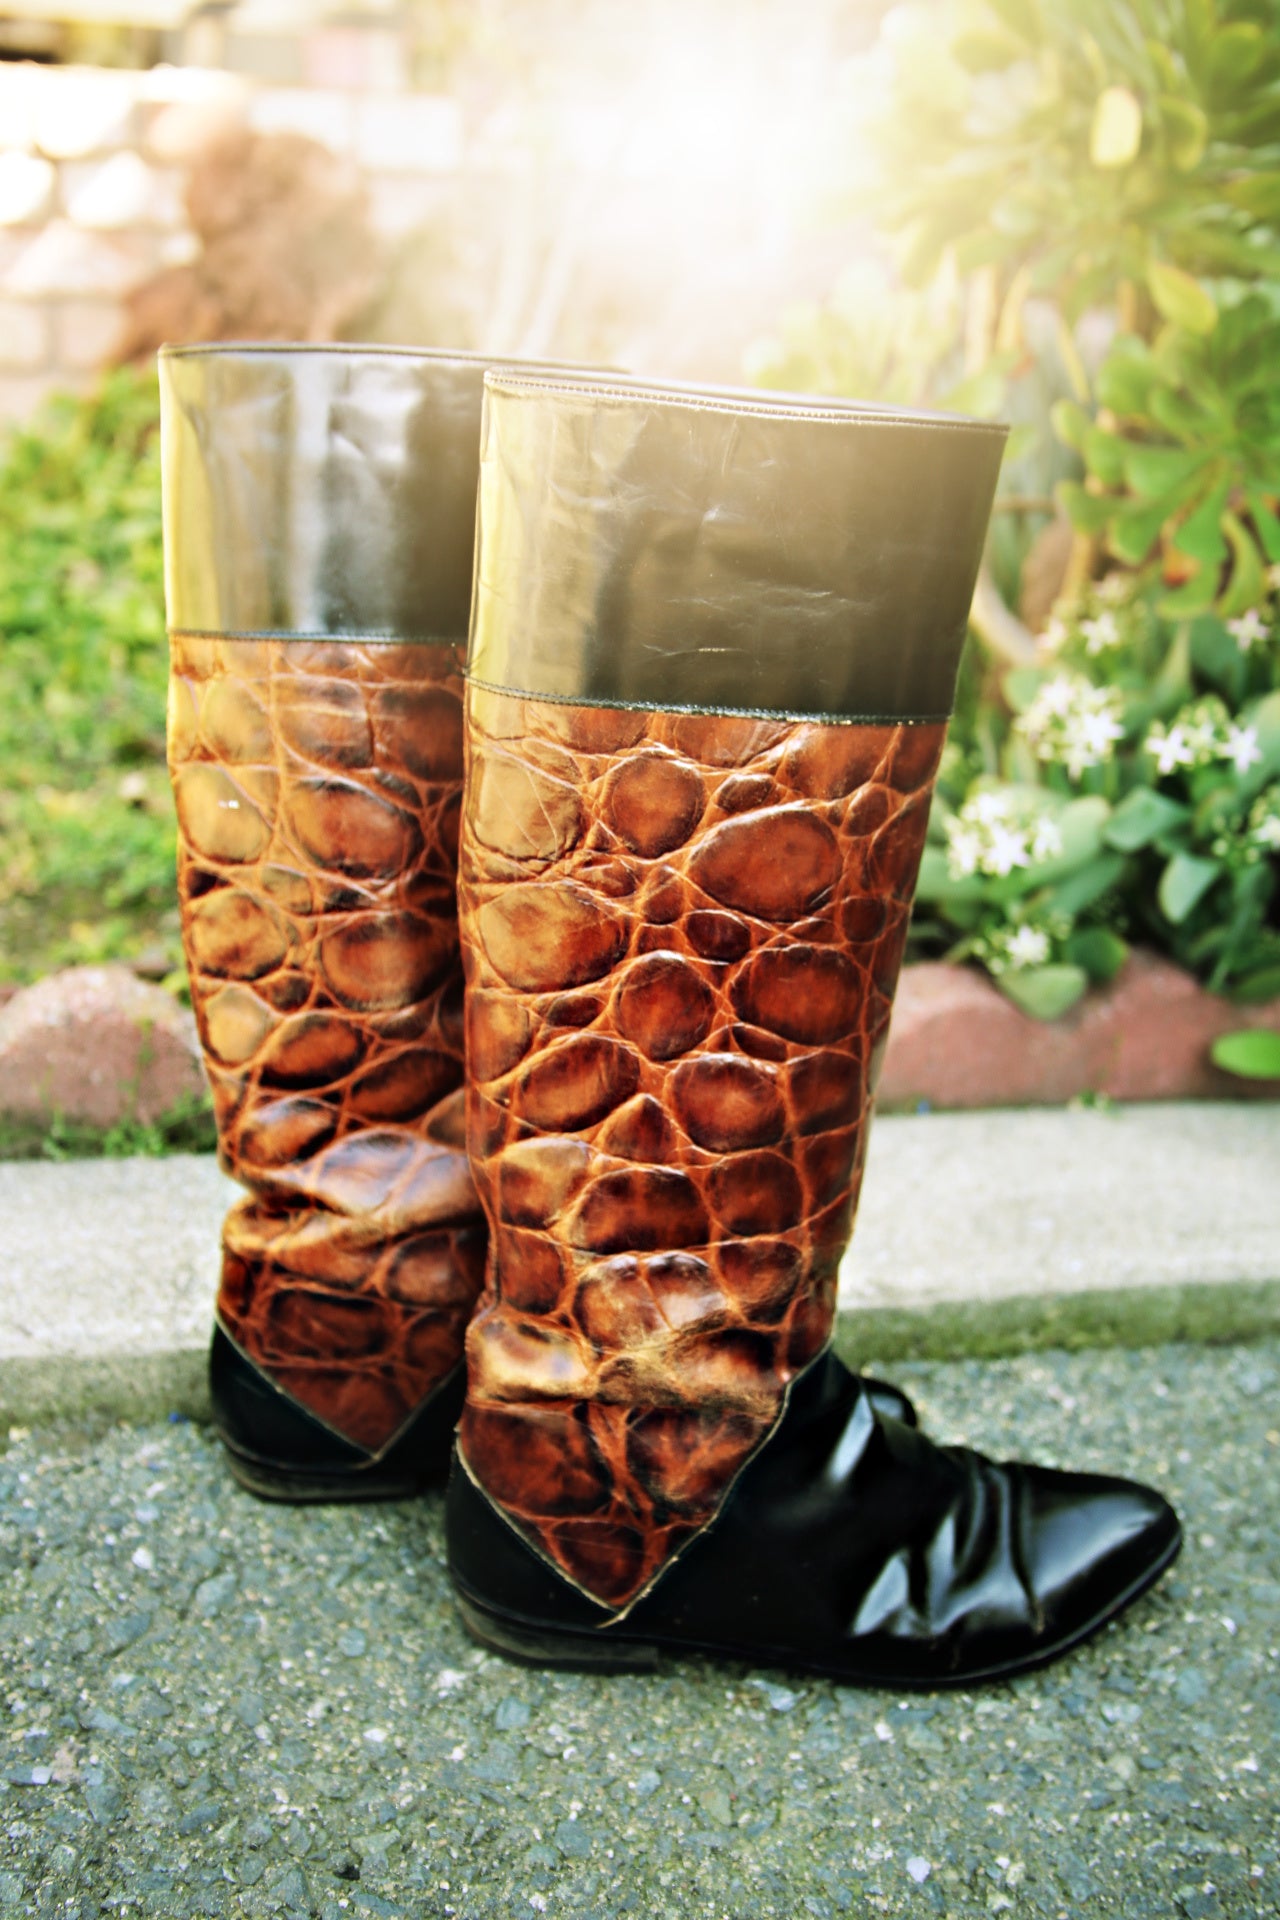 Giraffe Printed Leather Riding boots 8.5